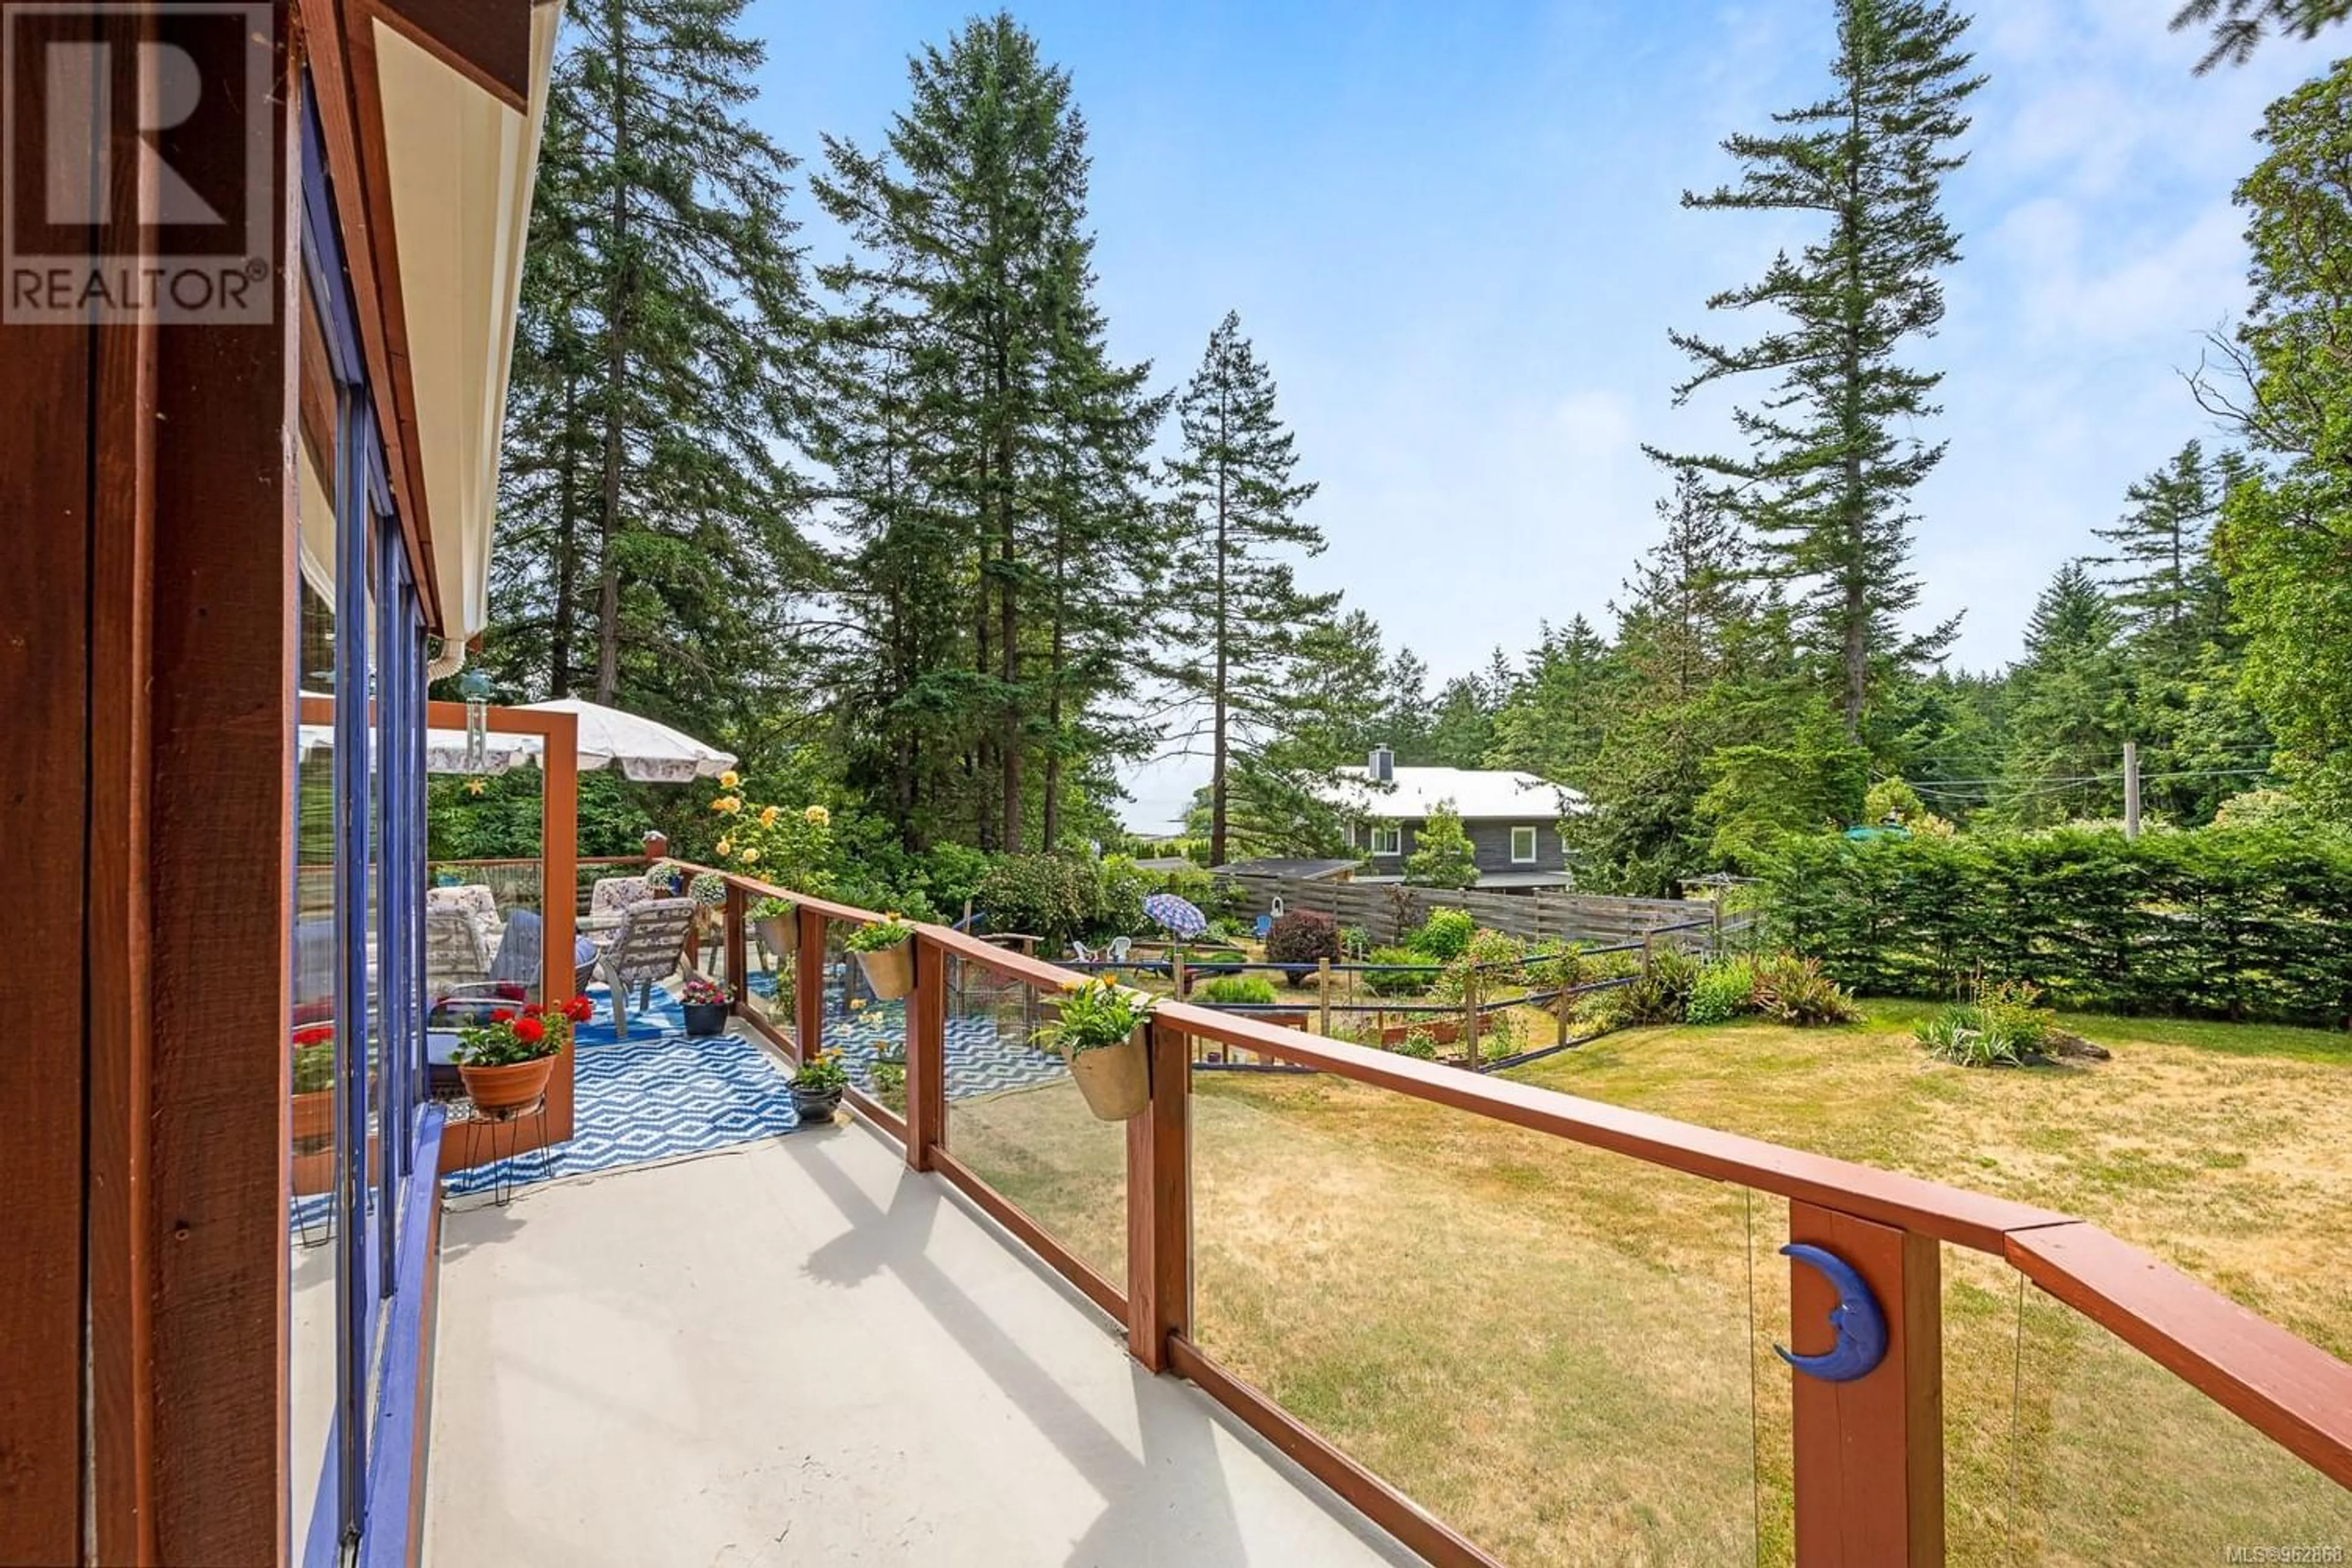 Patio for 5270 McLeod Rd, Hornby Island British Columbia V0R1Z0